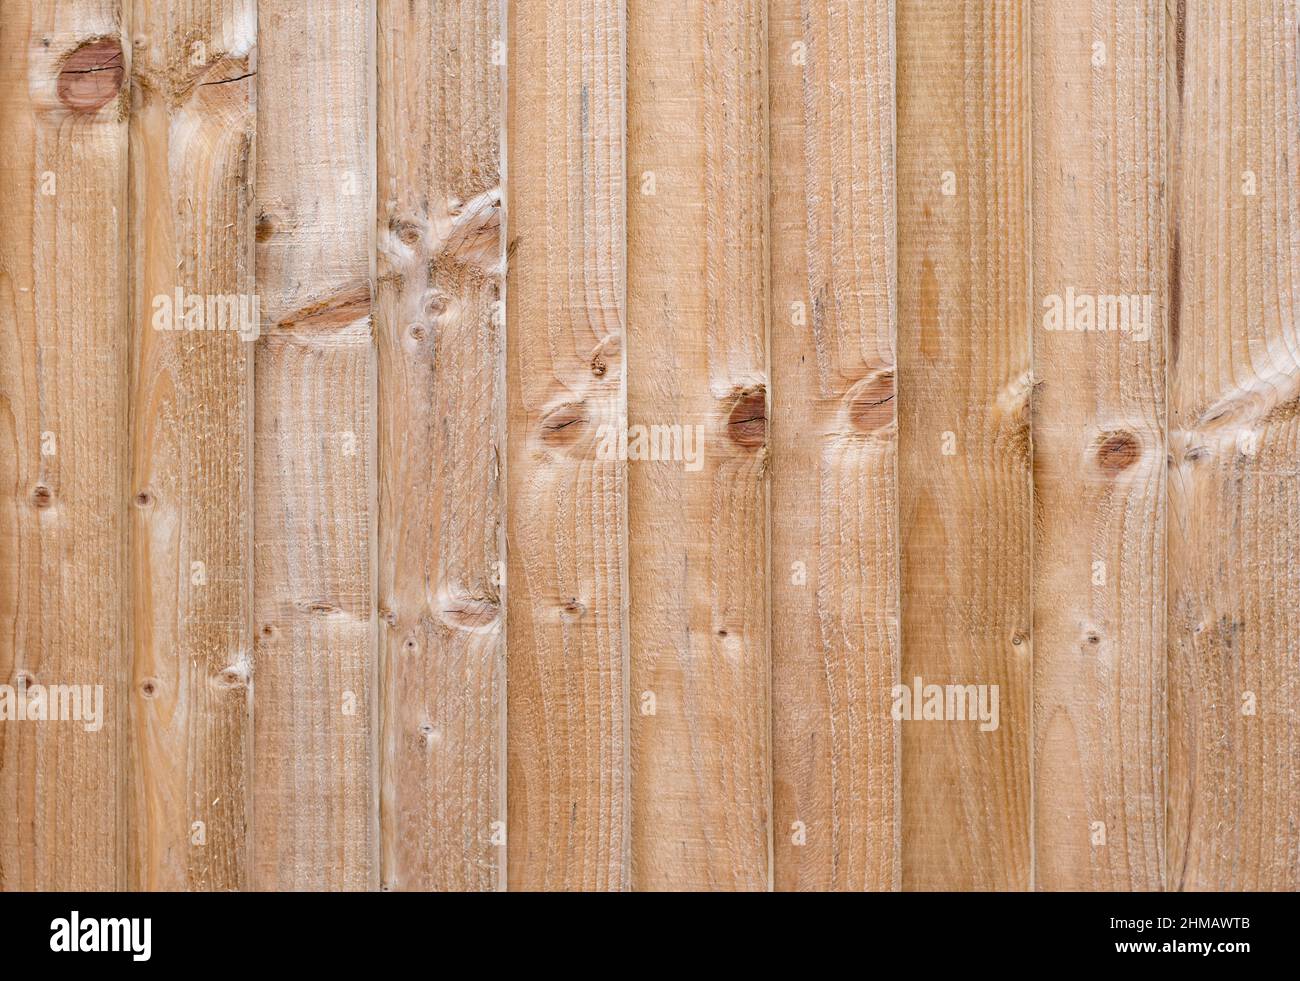 Plain fence made of rough wooden planks Stock Photo